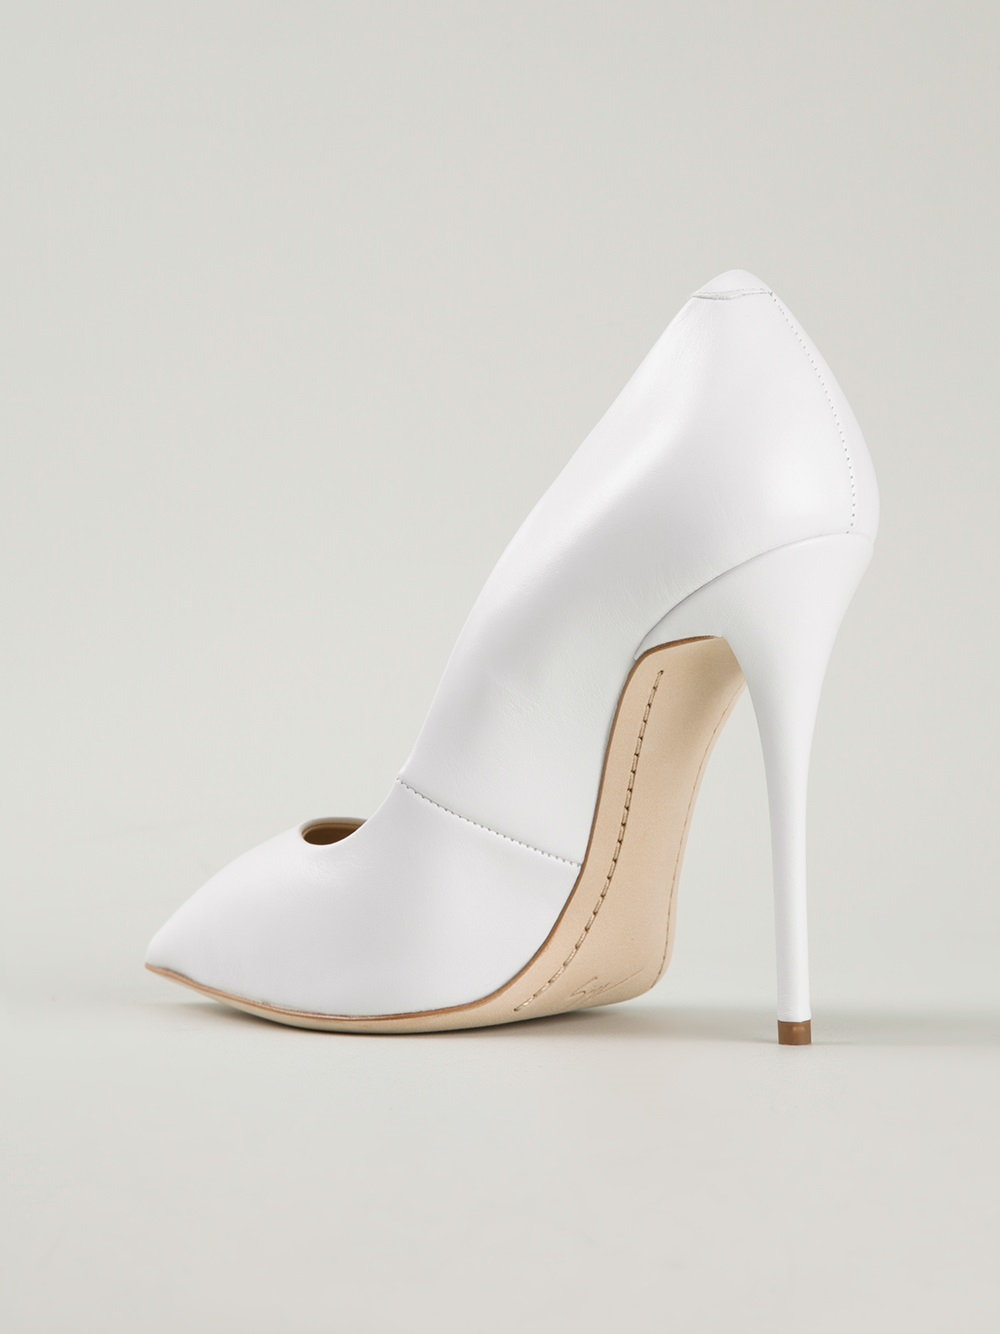 Giuseppe Zanotti Pointed Toe Pumps in White - Lyst